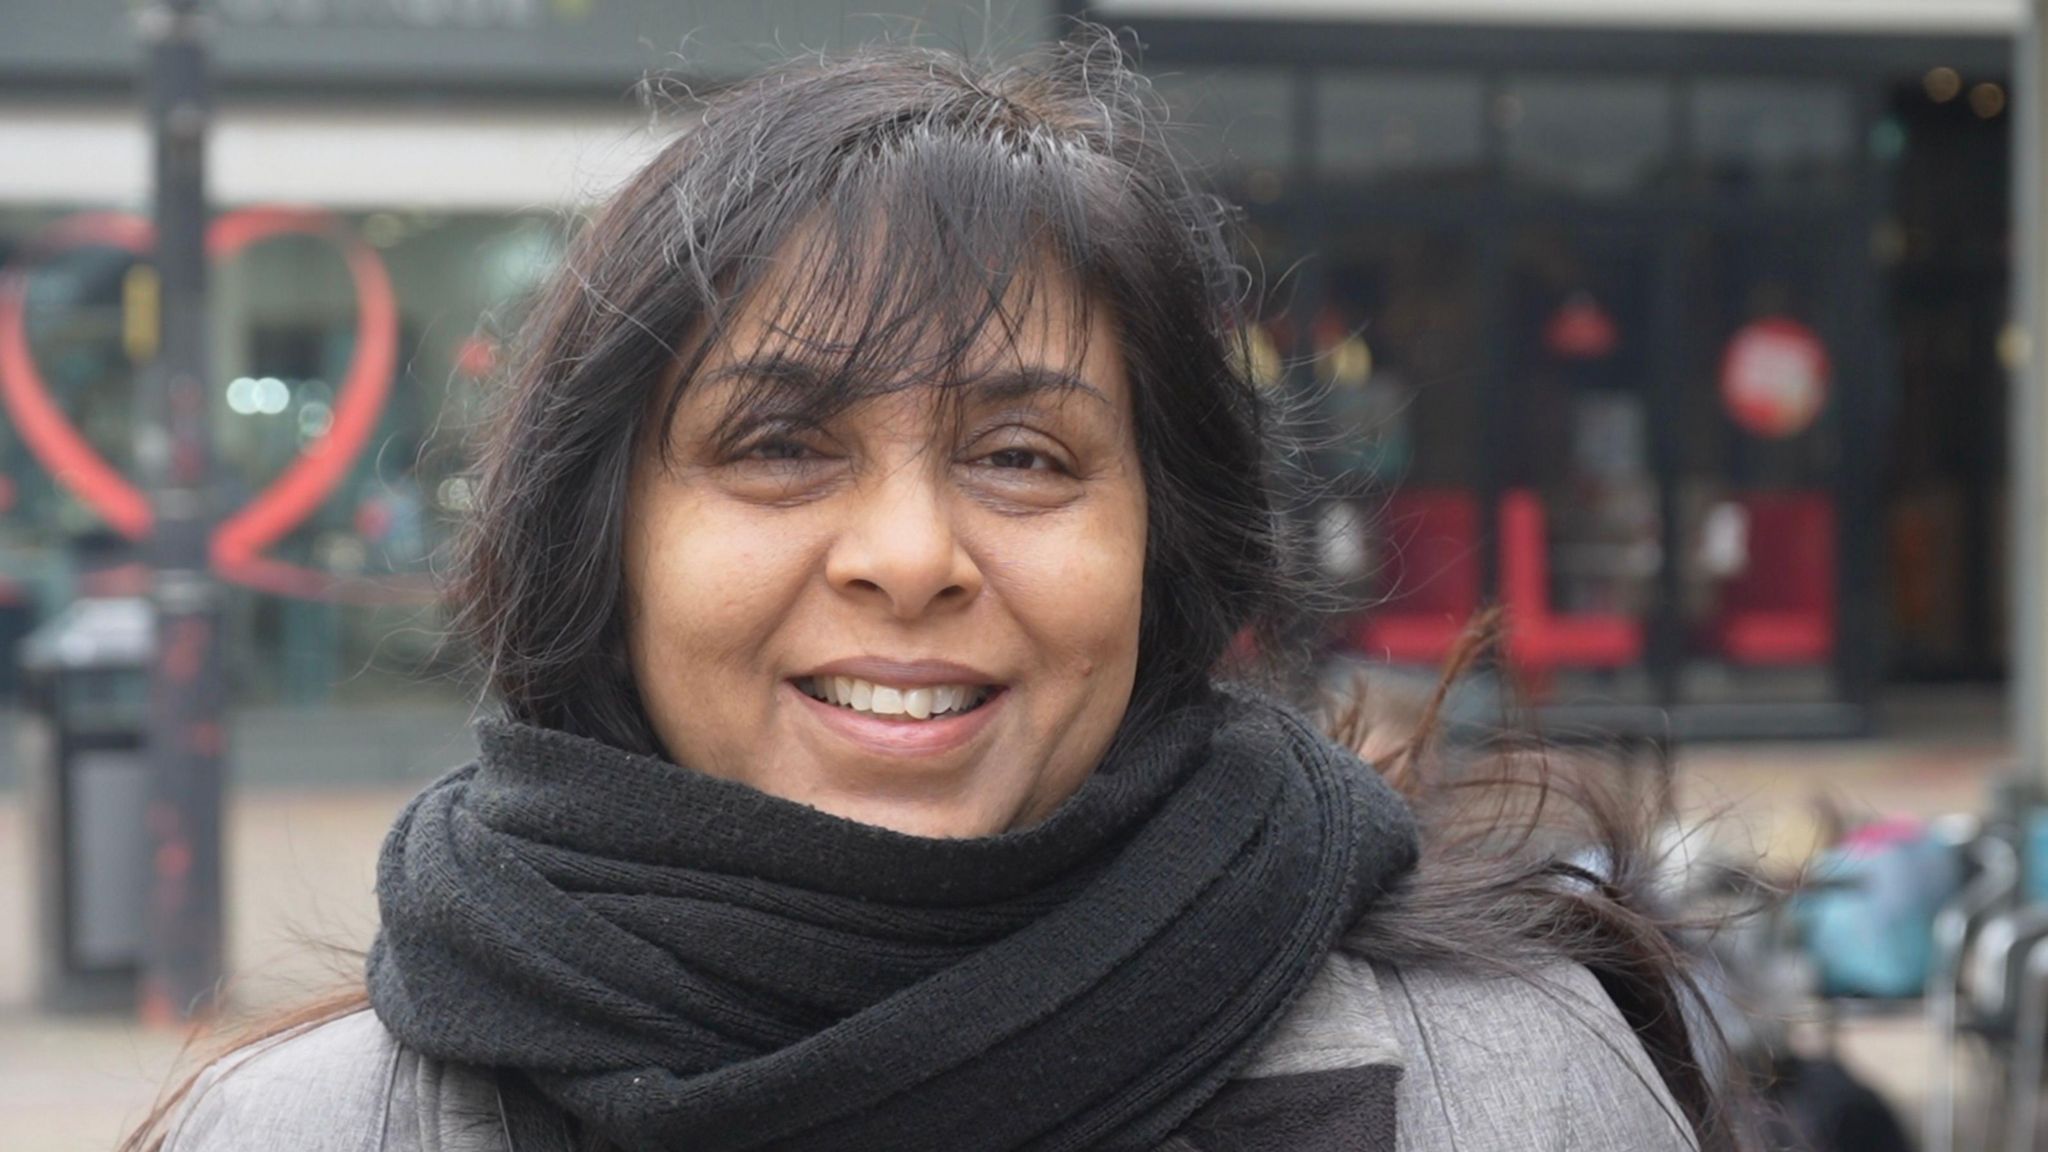 Rasna Patel in Harlow town centre, wearing a scarf and smiling